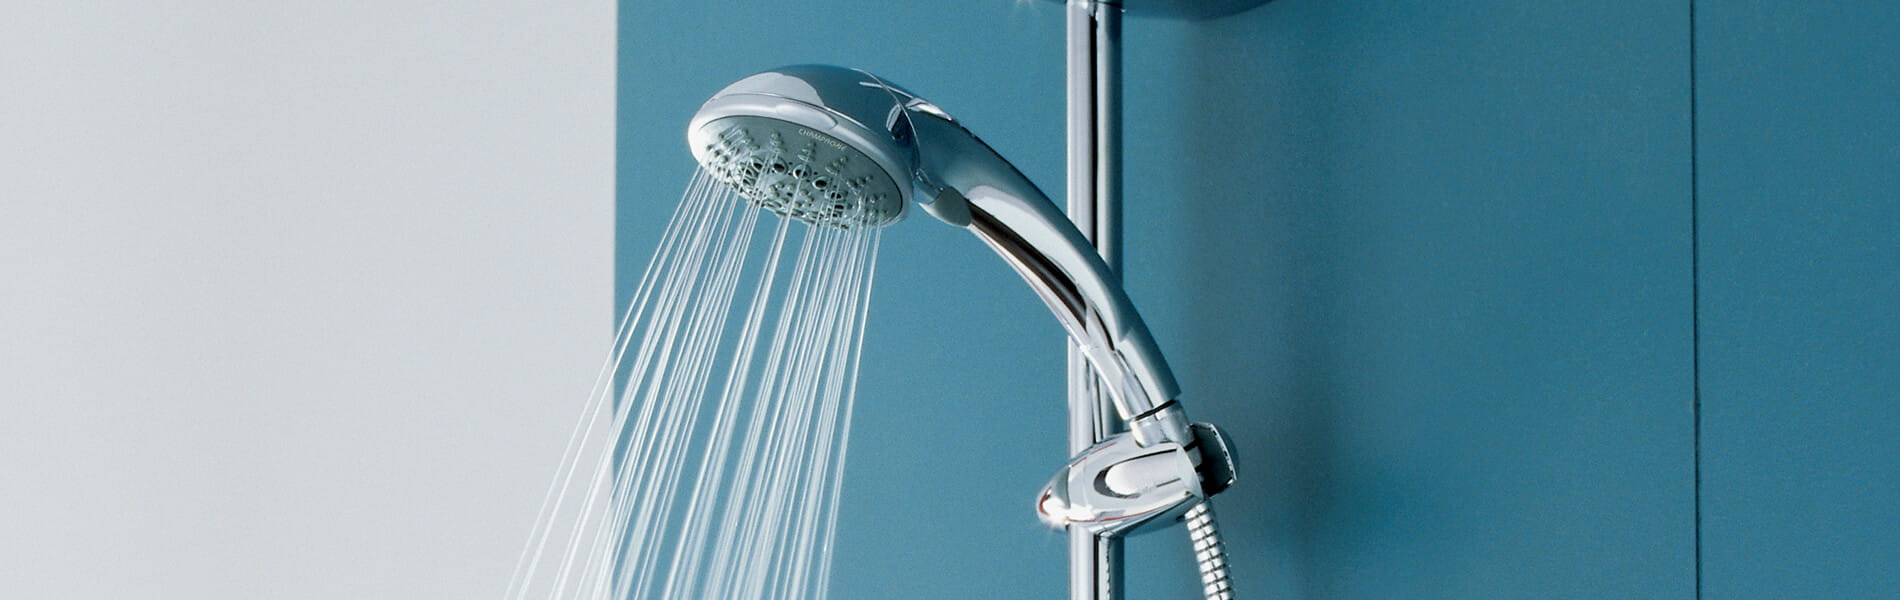 Movario Collection Shower Faucet by GROHE 